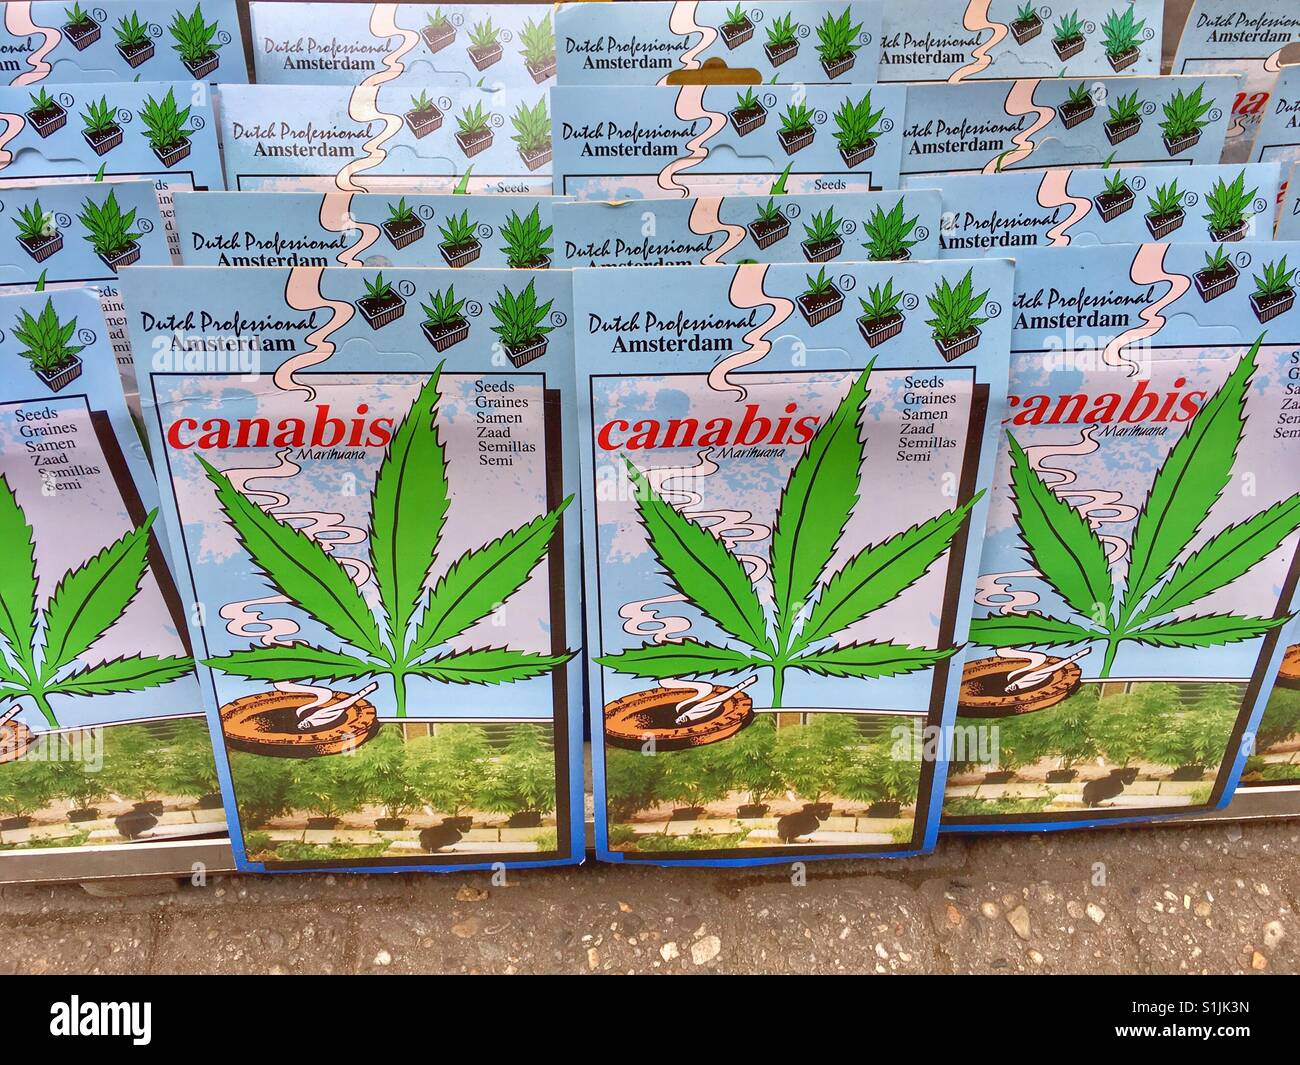 Cannabis growing starter kits for sale in Amsterdam, Netherlands Stock Photo